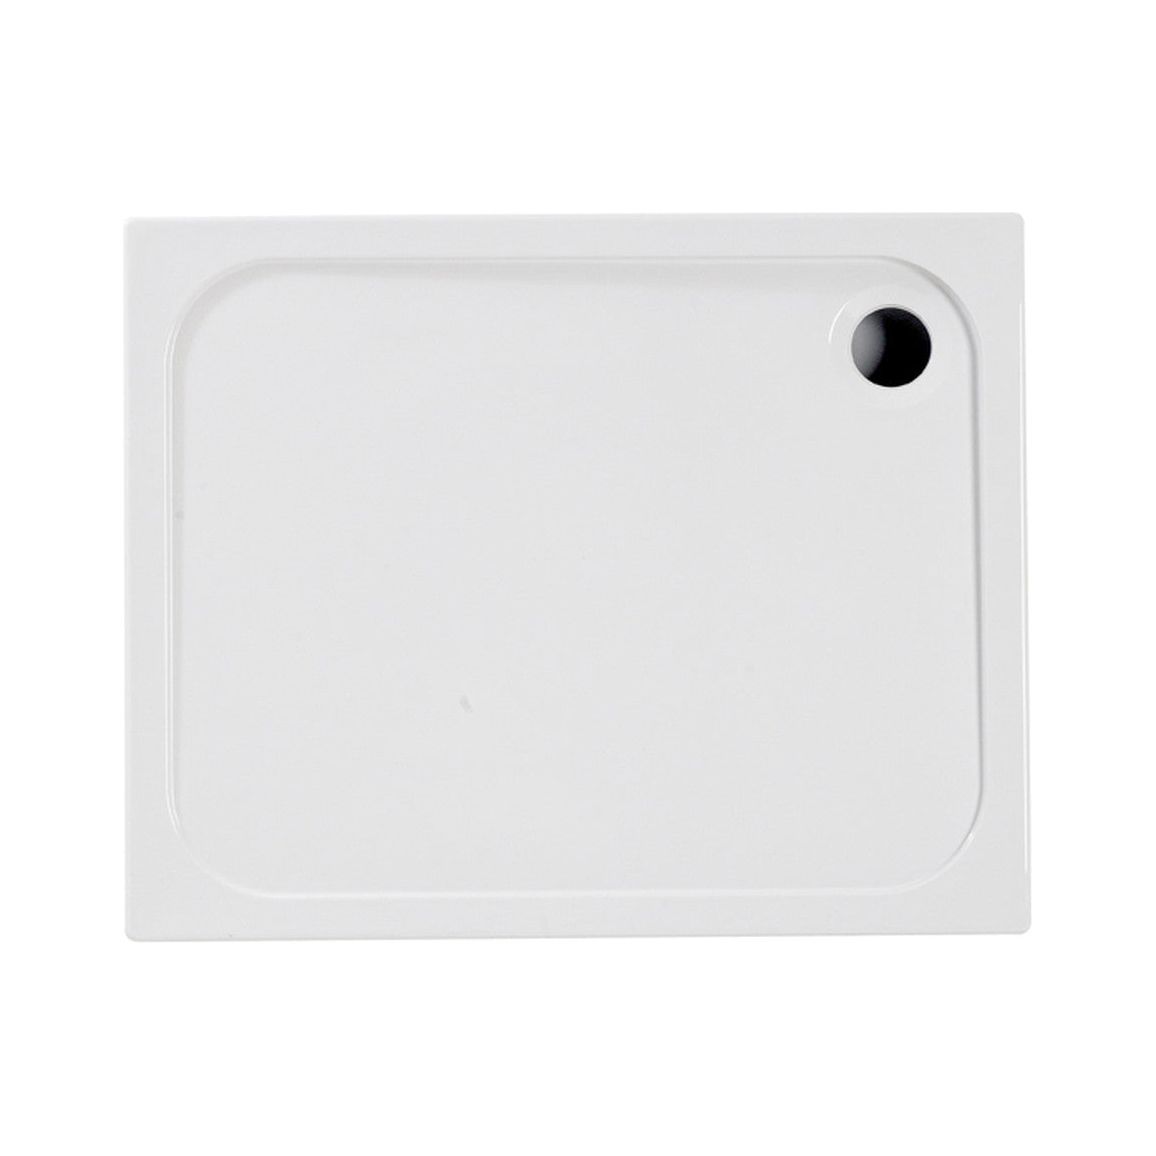 45mm Low Profile 1200x700mm Rectangular Tray & Waste